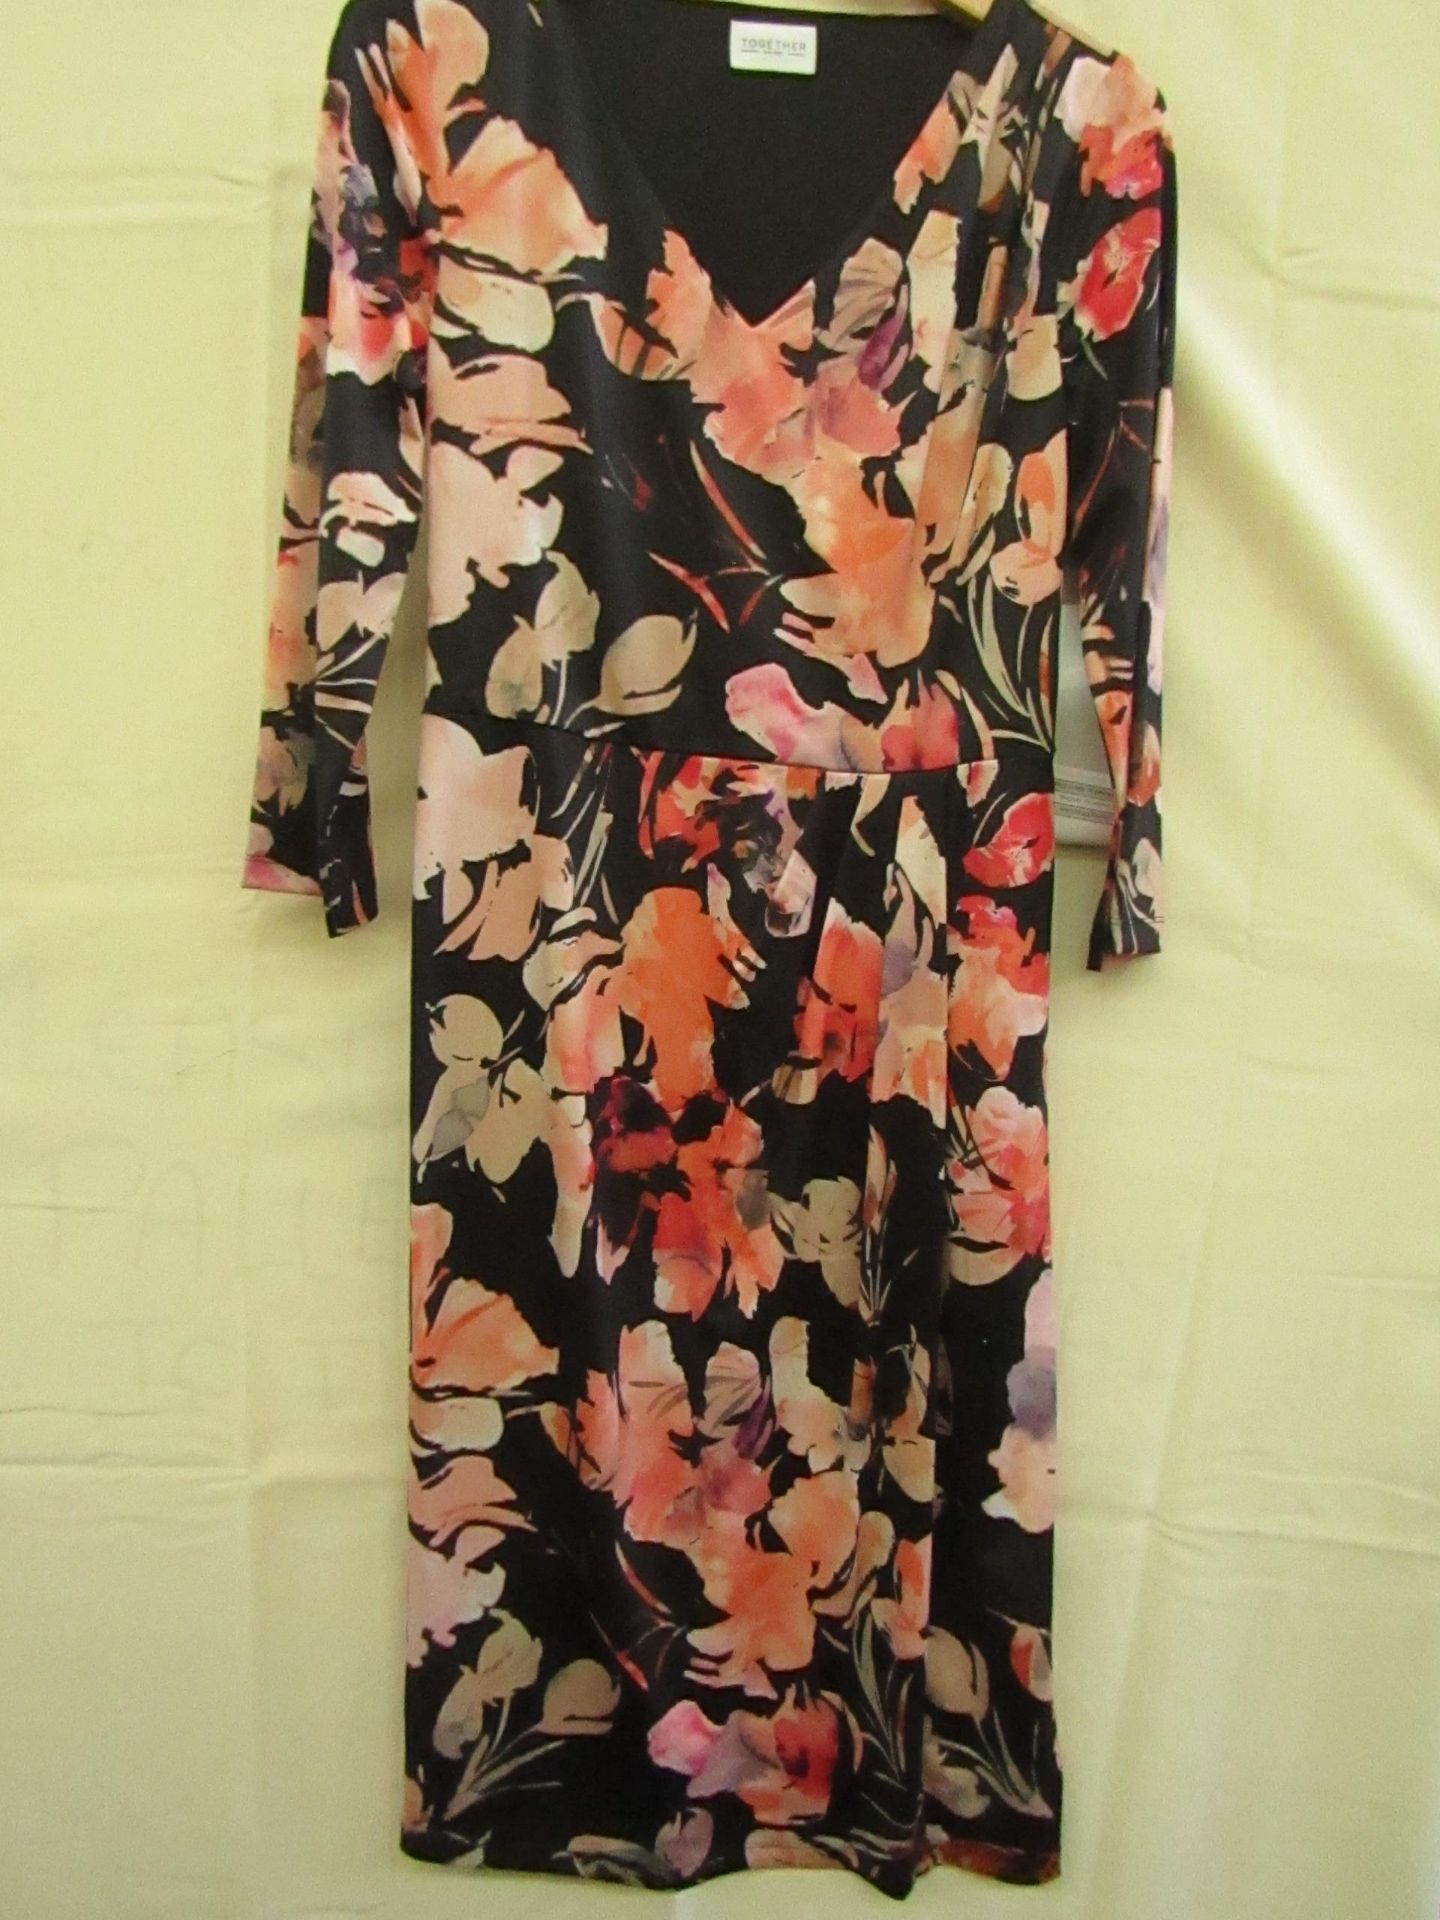 Together Dress Size Approx 8-10 Looks Unworn No Tags